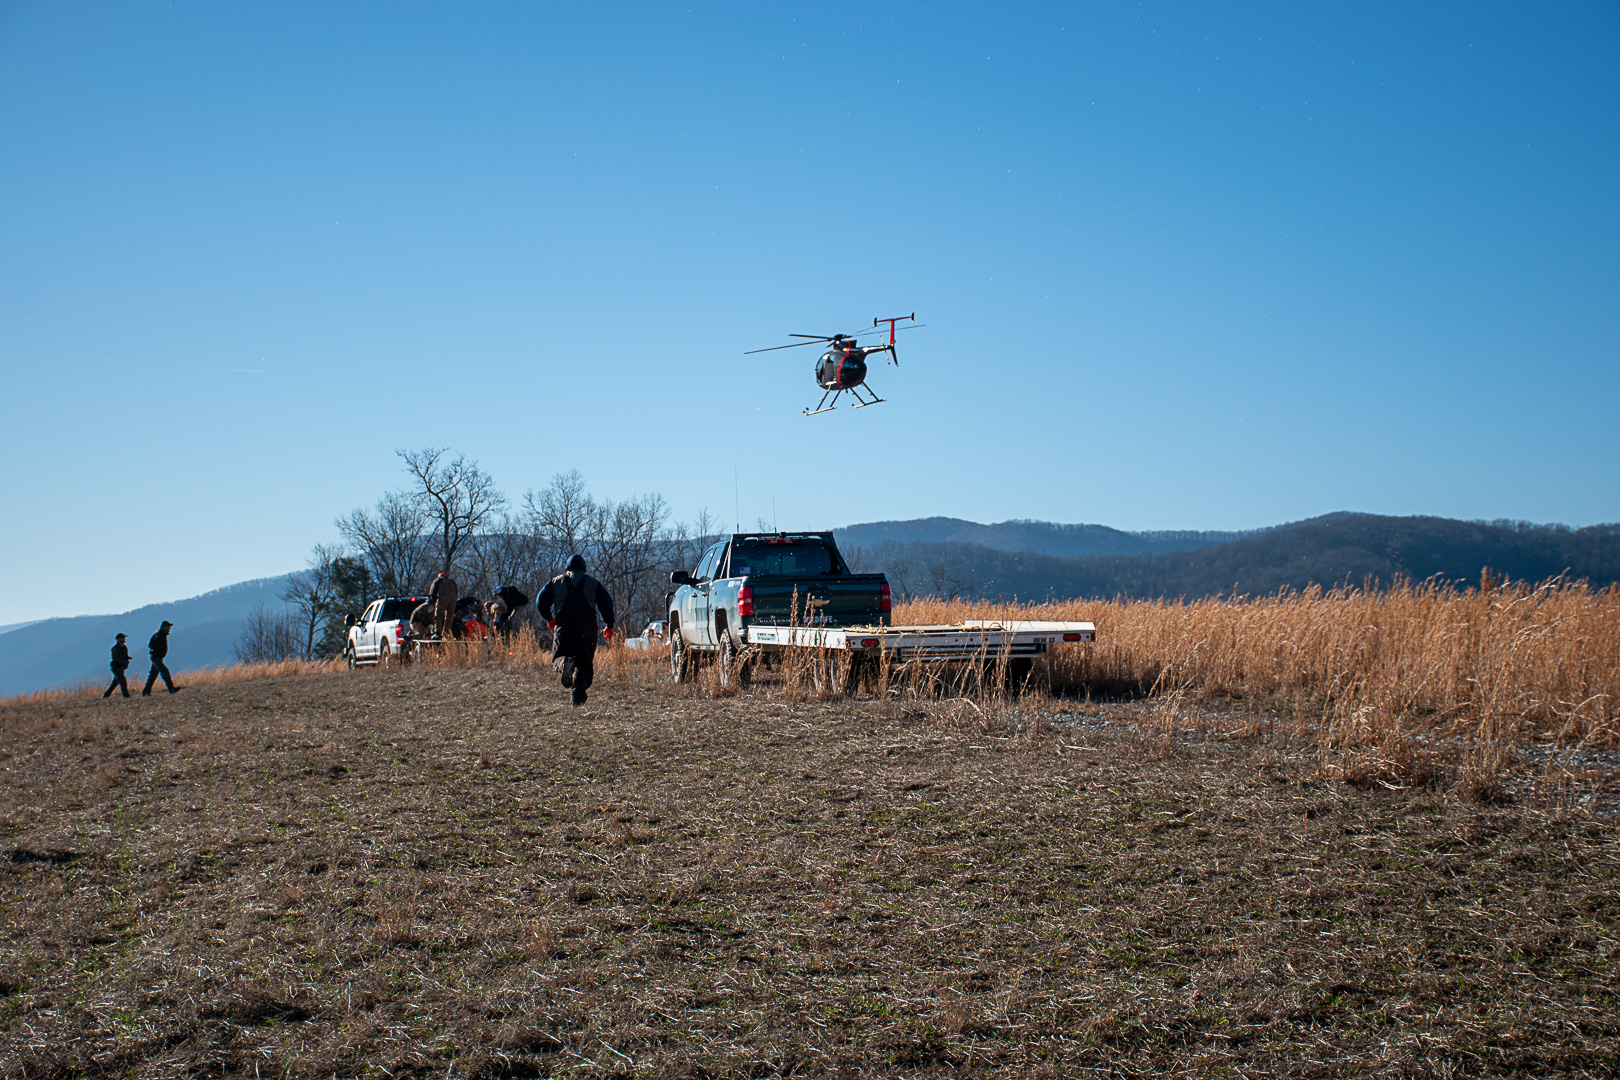 Helicopter flies overhead as people run and walk to a trailer behind a truck with an elk on it.